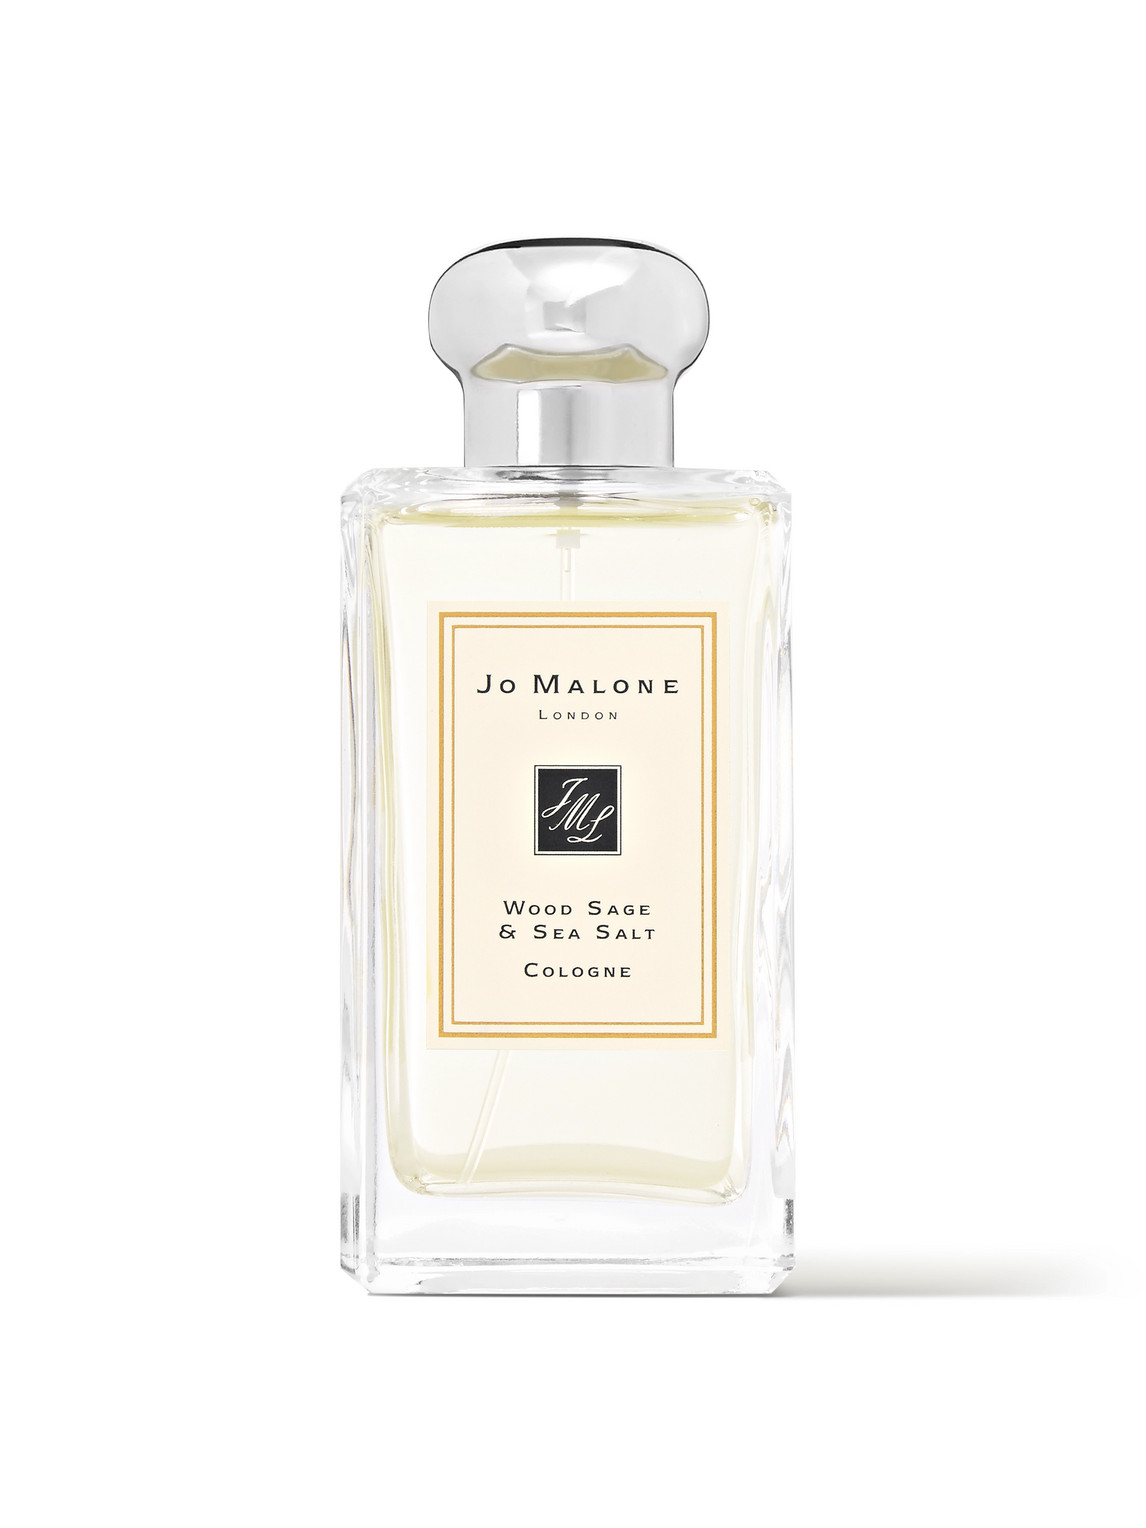 Jo Malone London Wood Sage & Sea Salt Cologne, 100ml In Colorless